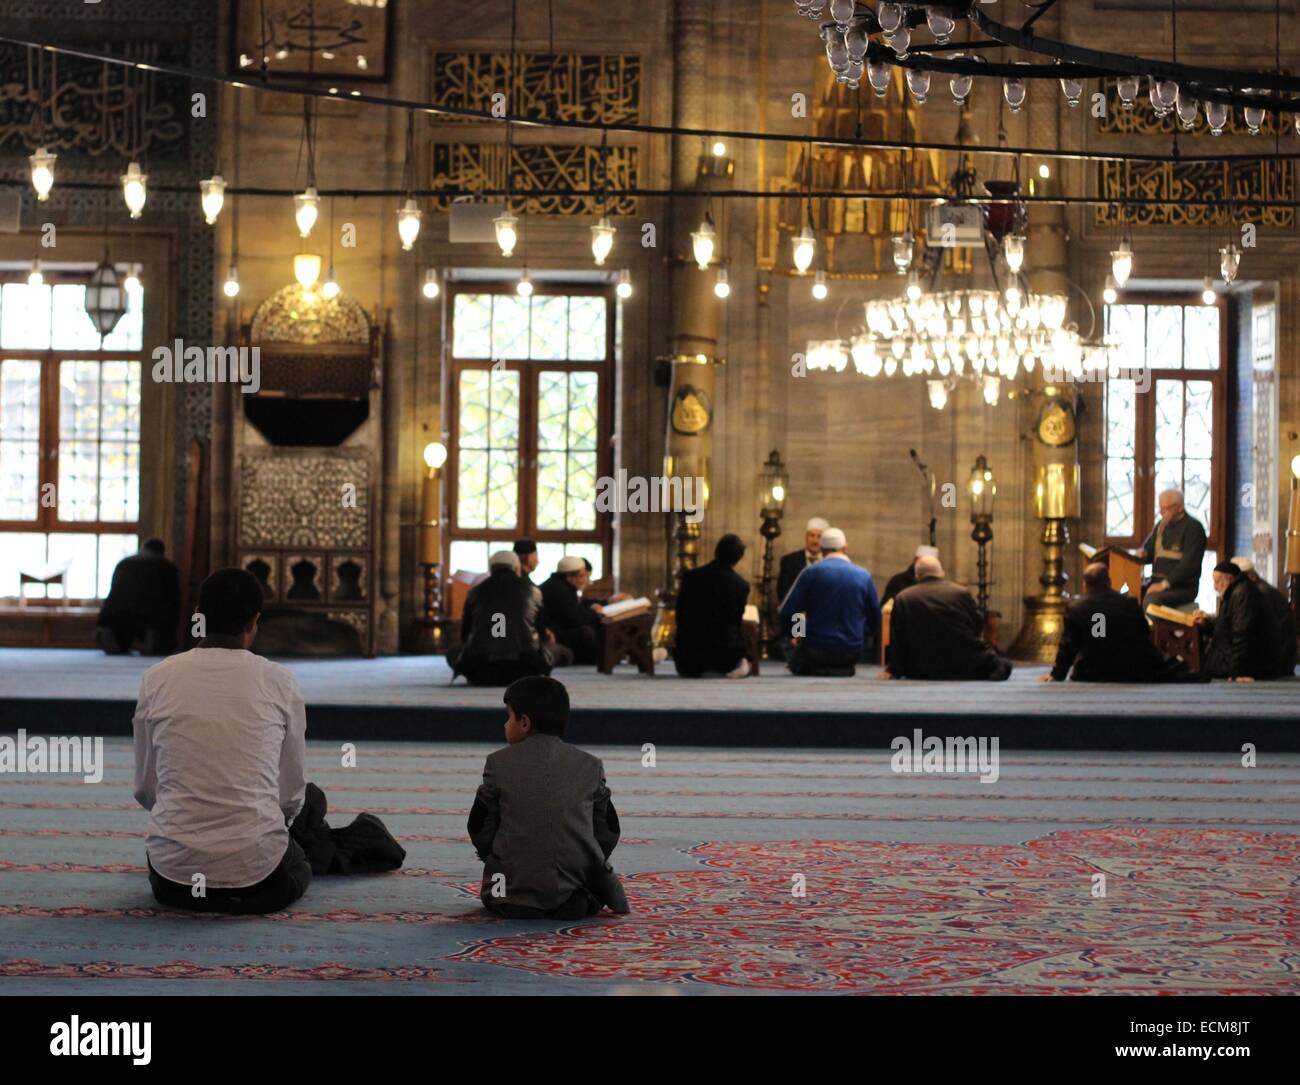 Boy watching his father while praying in Yeni Cami (New Mosque), Eminonu, Istanbul. People are praying in background. Stock Photo